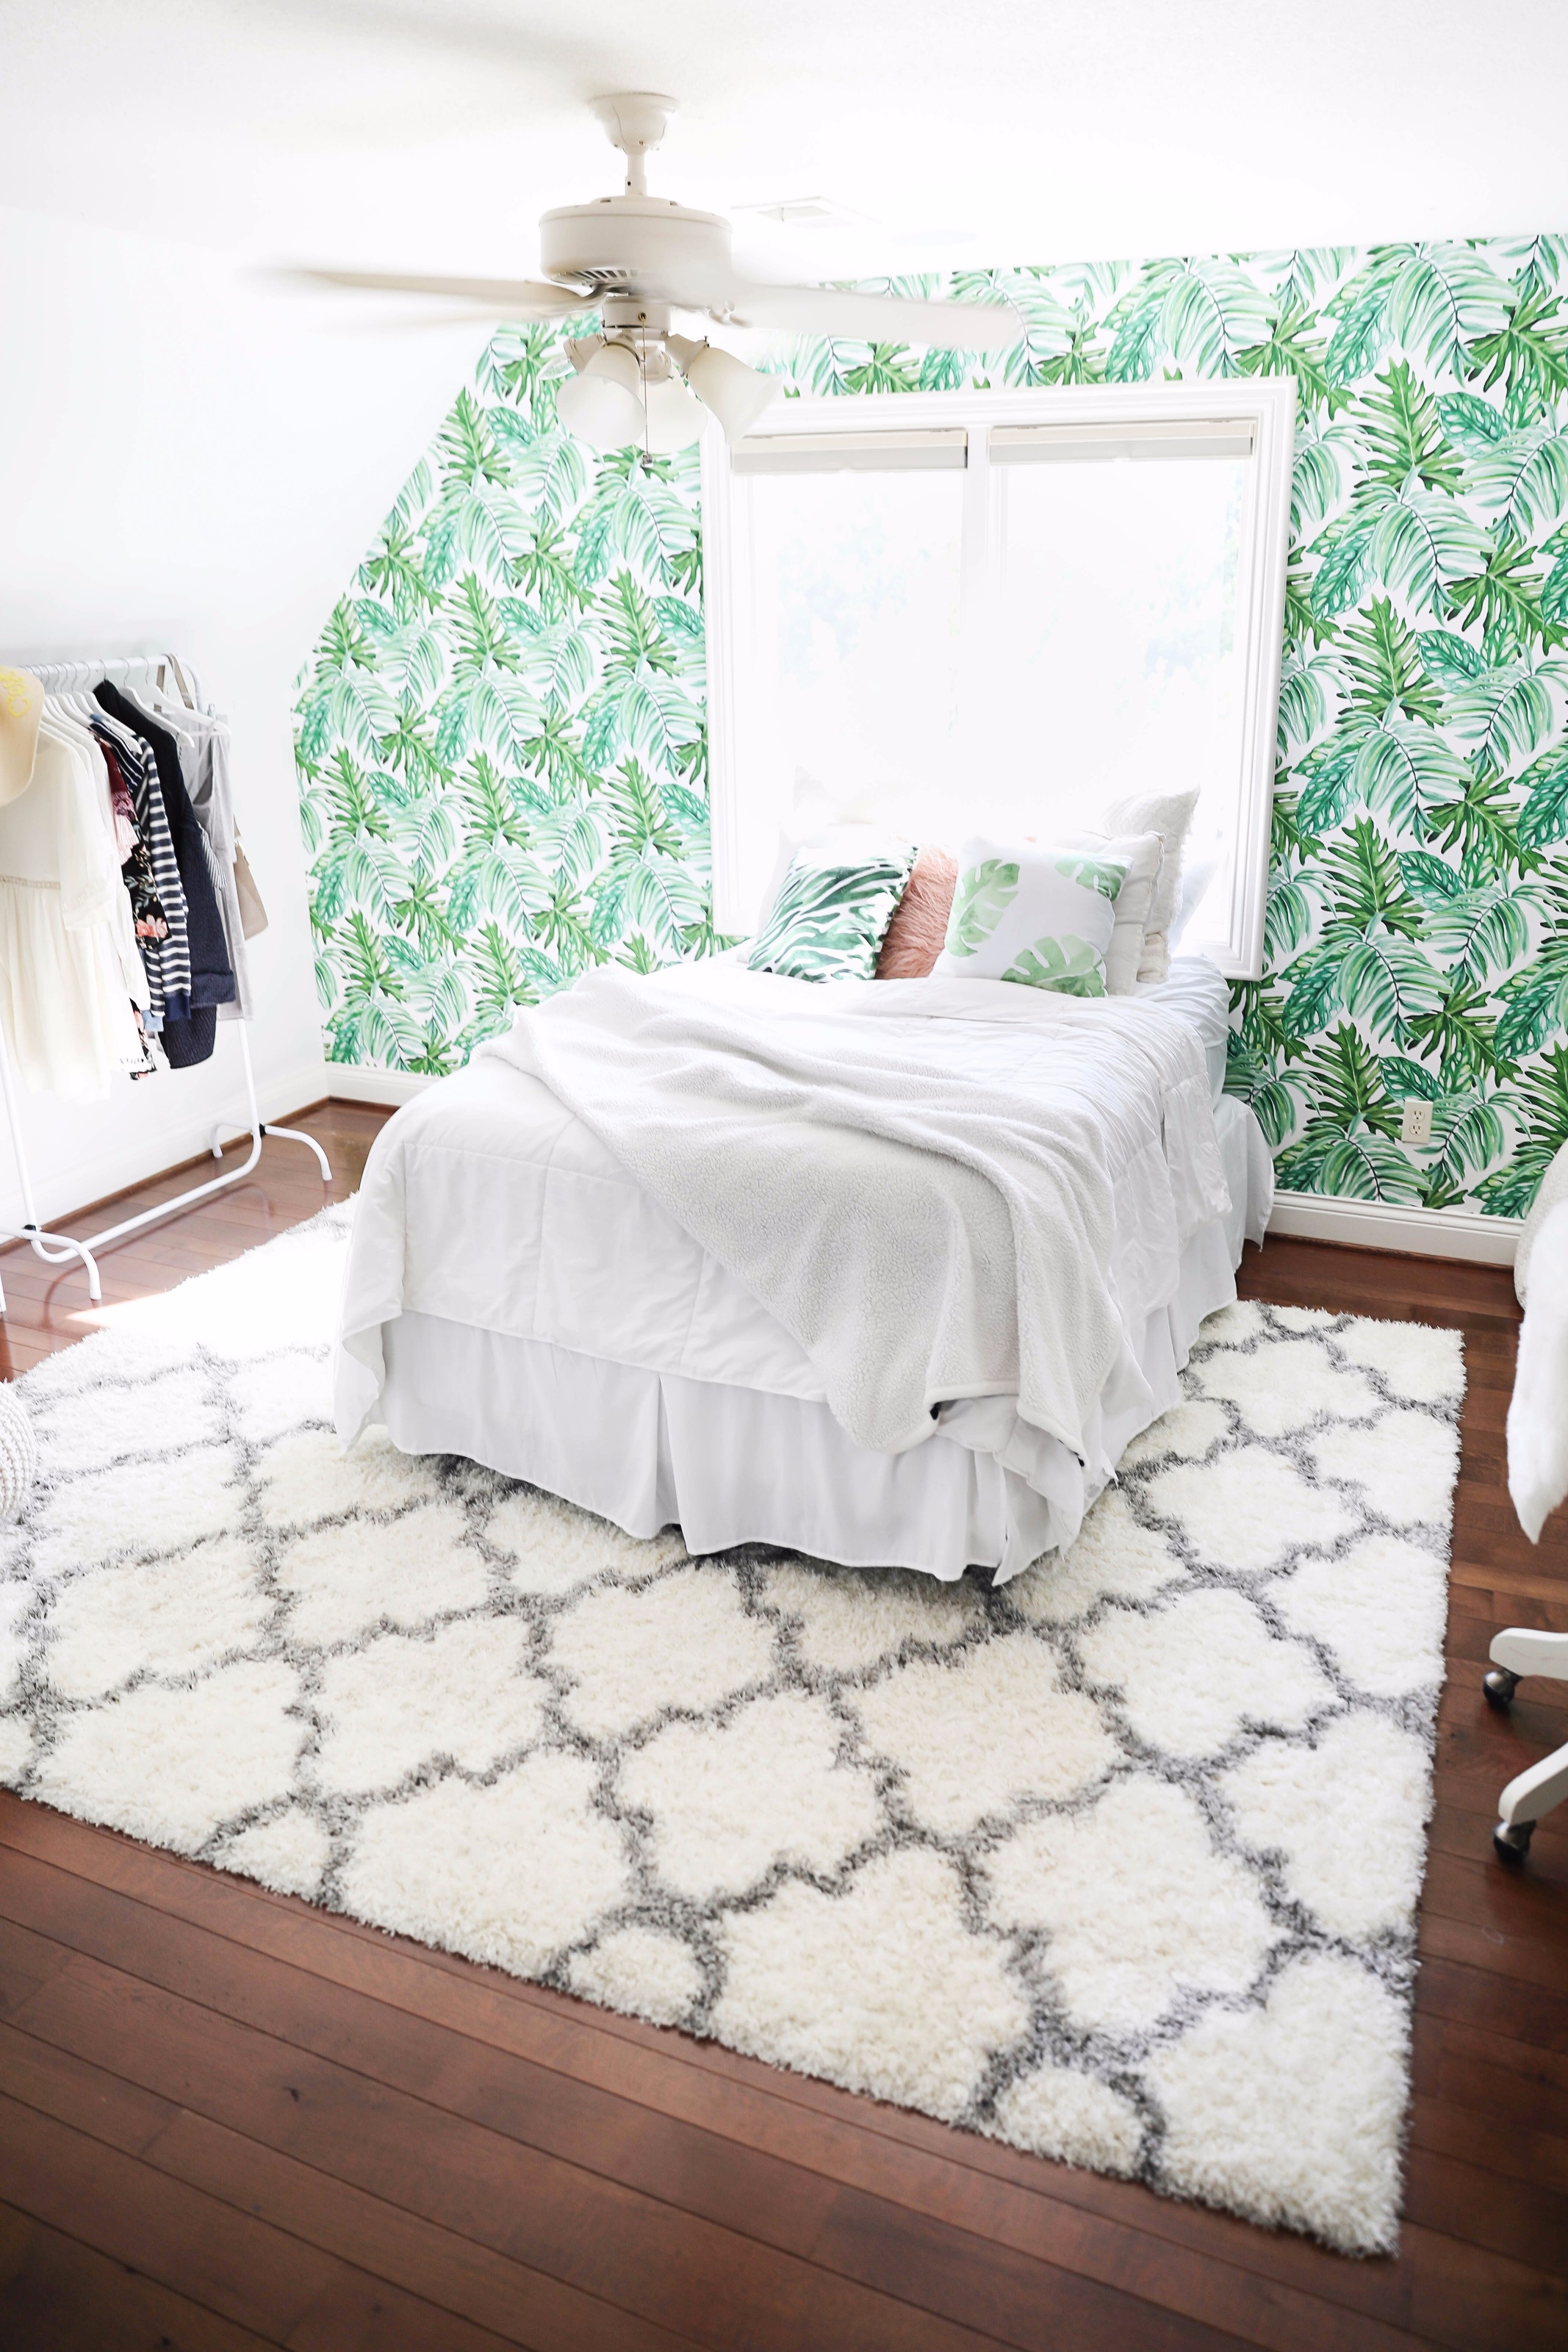 Transtioning your room into spring! How to make your room bright for spring! Details on fashion blog daily dose of charm by lauren lindmark